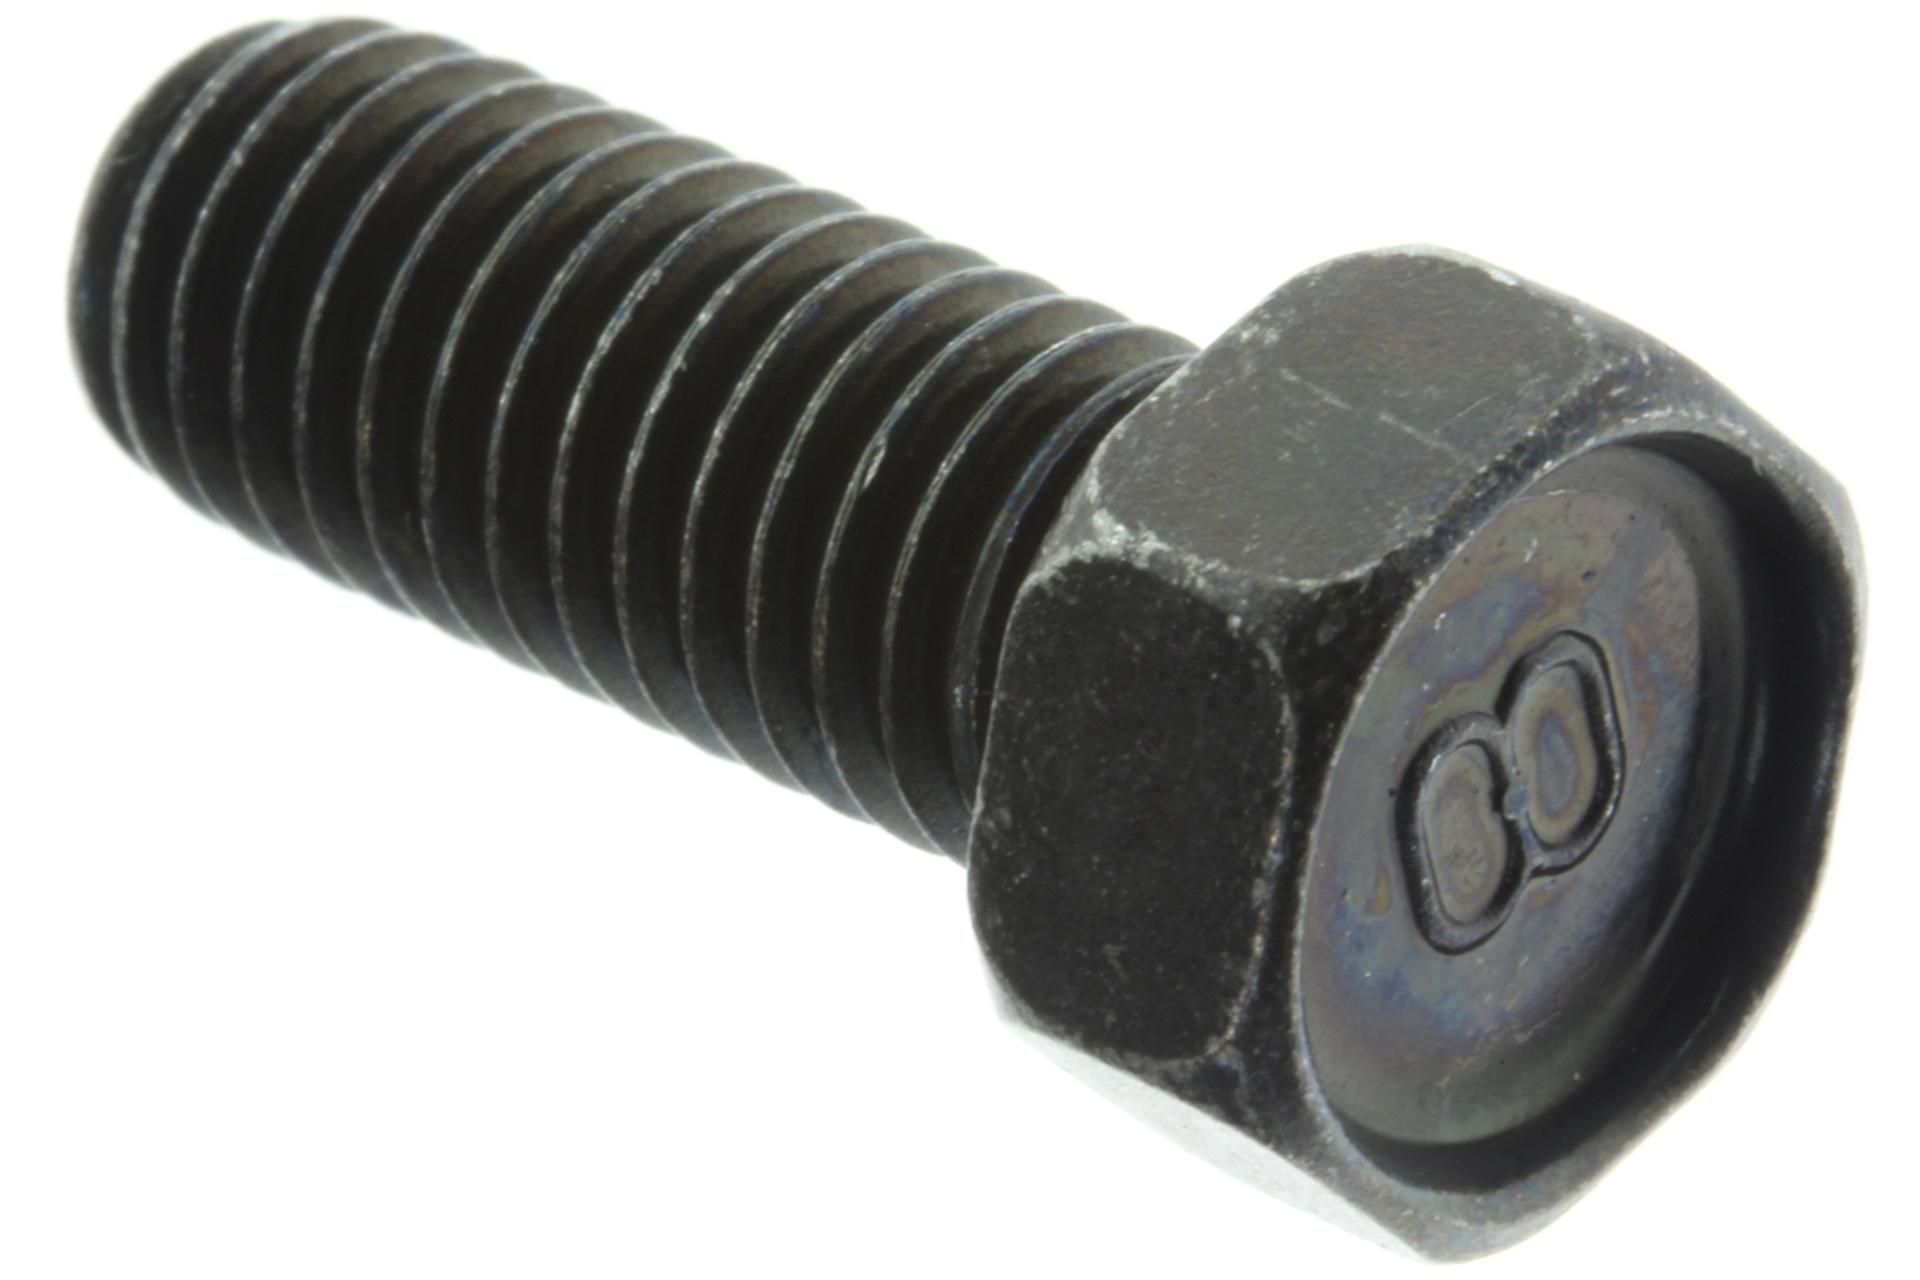 97507-08620-00 Superseded by 97017-08020-00 - BOLT,HEXAGON